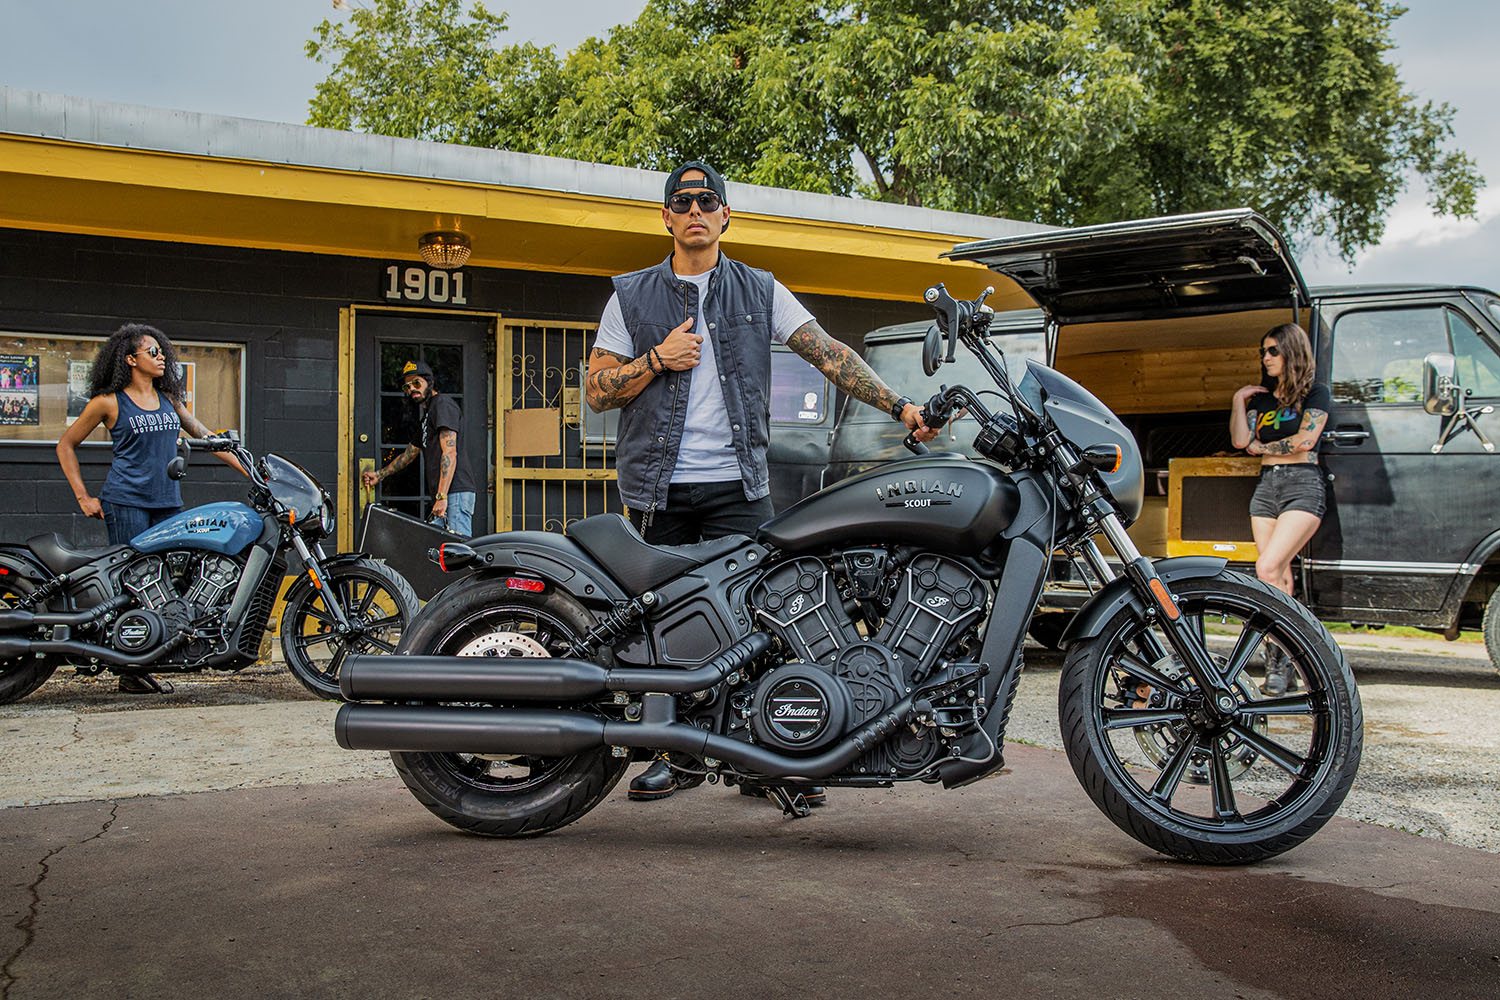 2022 Indian Scout® Rogue ABS in EL Cajon, California - Photo 19